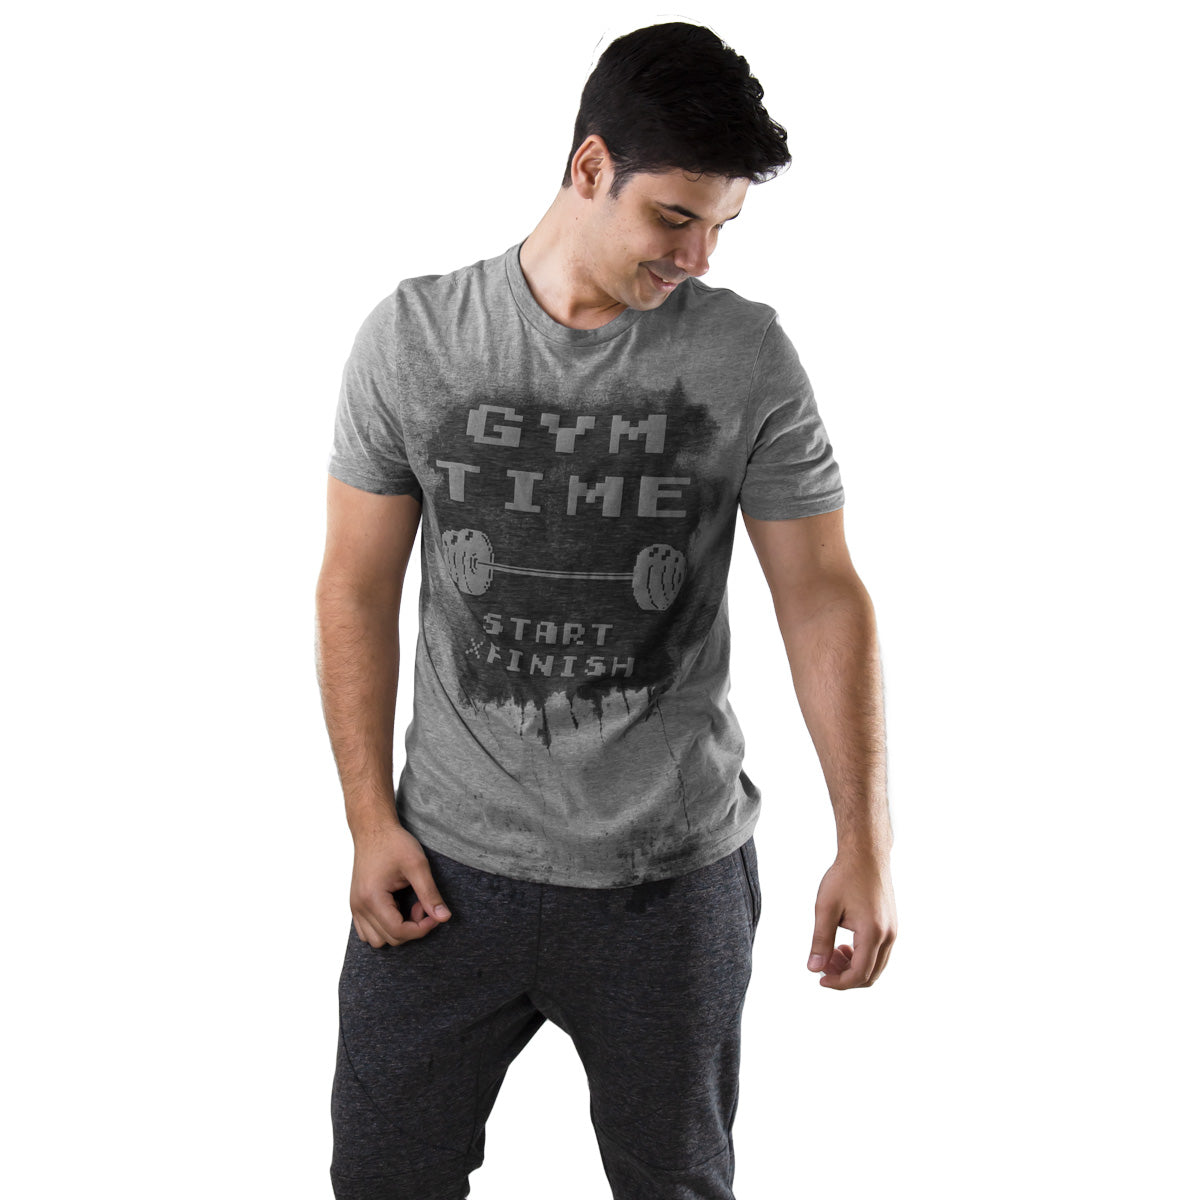 Never Let'em Know Your Next Move - Sweat Activated Shirt with Invisible  Message – OmegaBurn